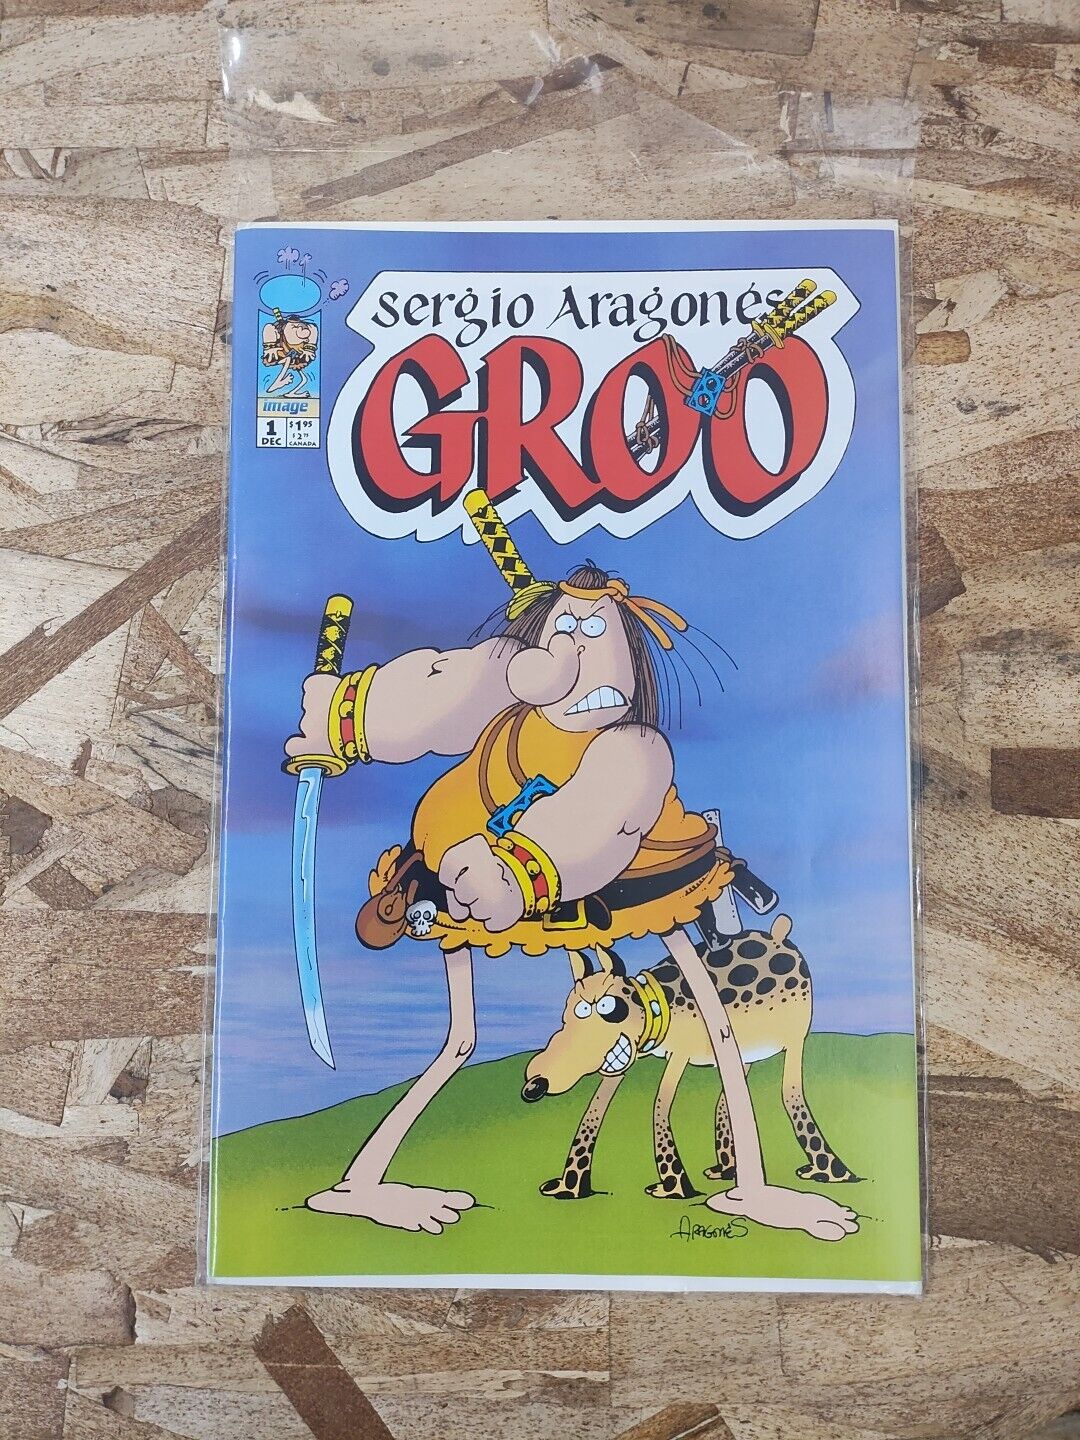 1994 Image Comics Sergio Aragones Groo #1 1st Printing Iconic Cover The Wanderer